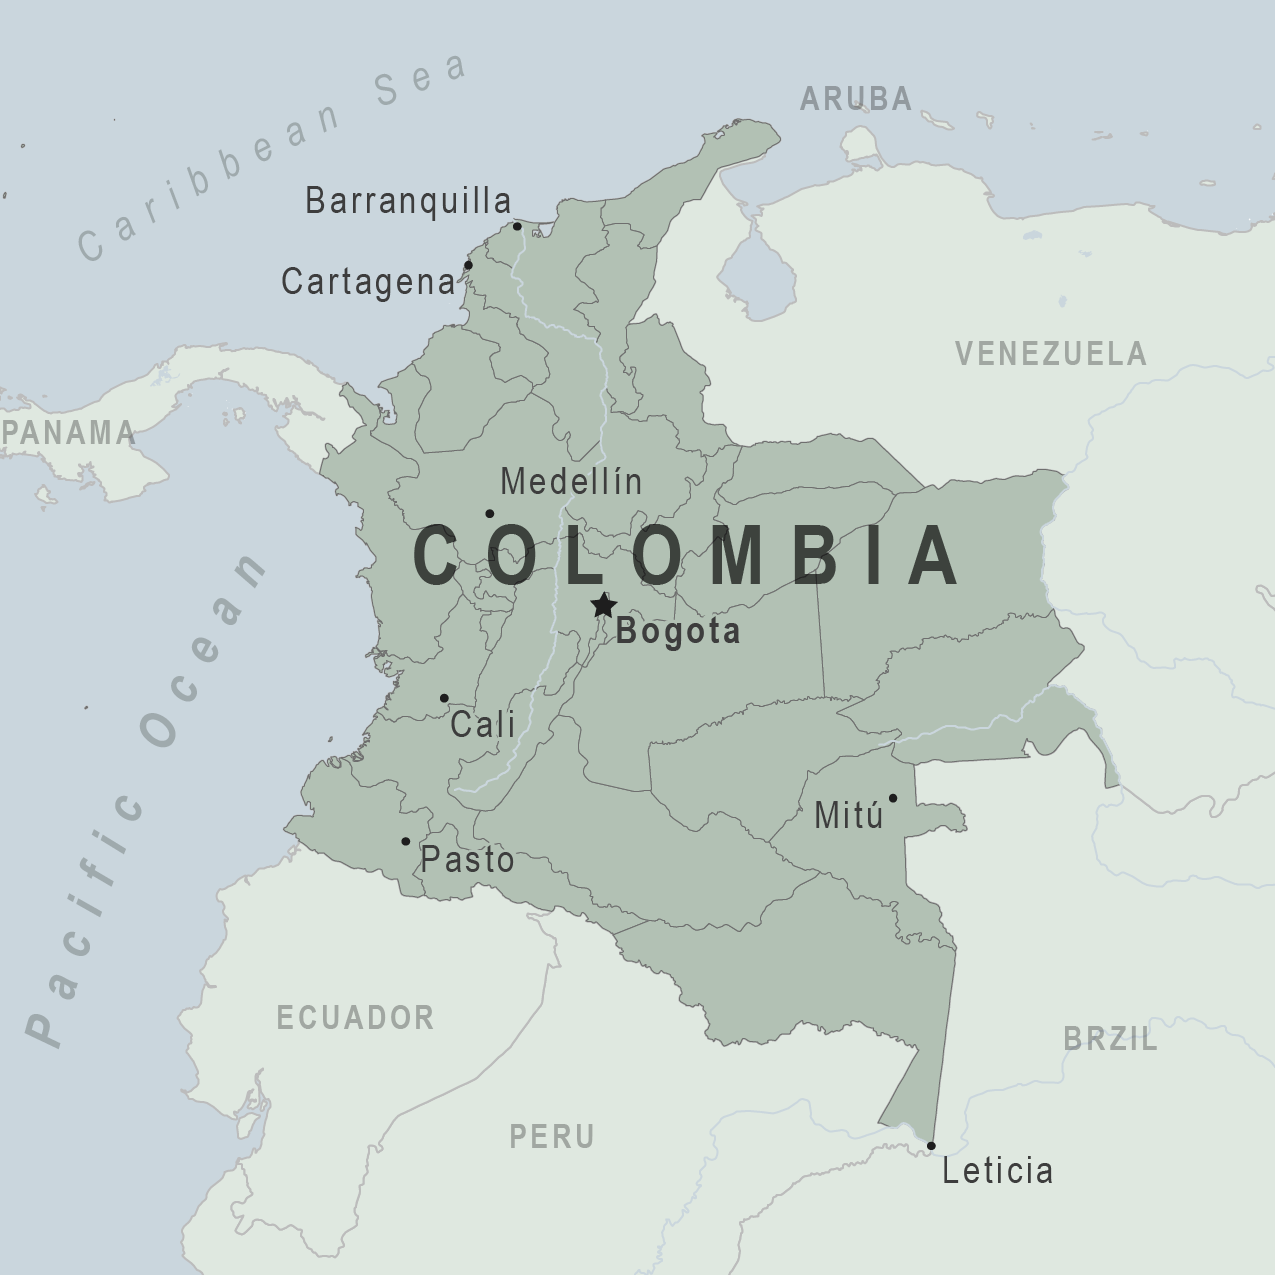 Colombia is bounded on the north by the Caribbean Sea, the northwest by Panama, the south by Ecuador and Peru, the east by Venezuela, the southeast by Brazil, and the west by the Pacific Ocean. It comprises 32 departments and the Capital District of Bogotá, the country's largest city. (Photo Internet Reproduction)